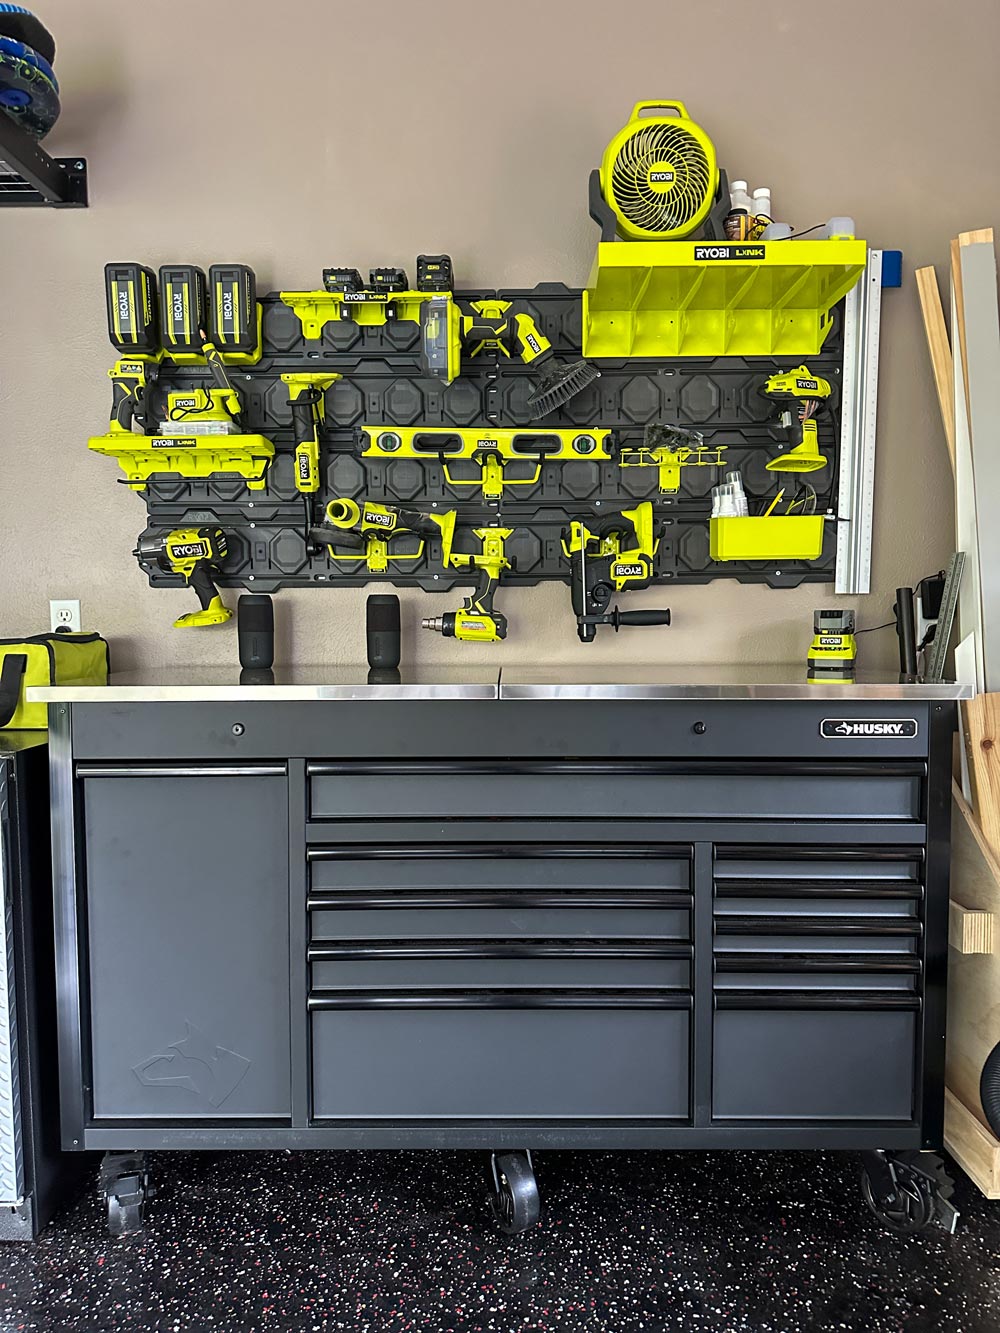 A Husky workbench, and a wall filled with Ryobi tools.